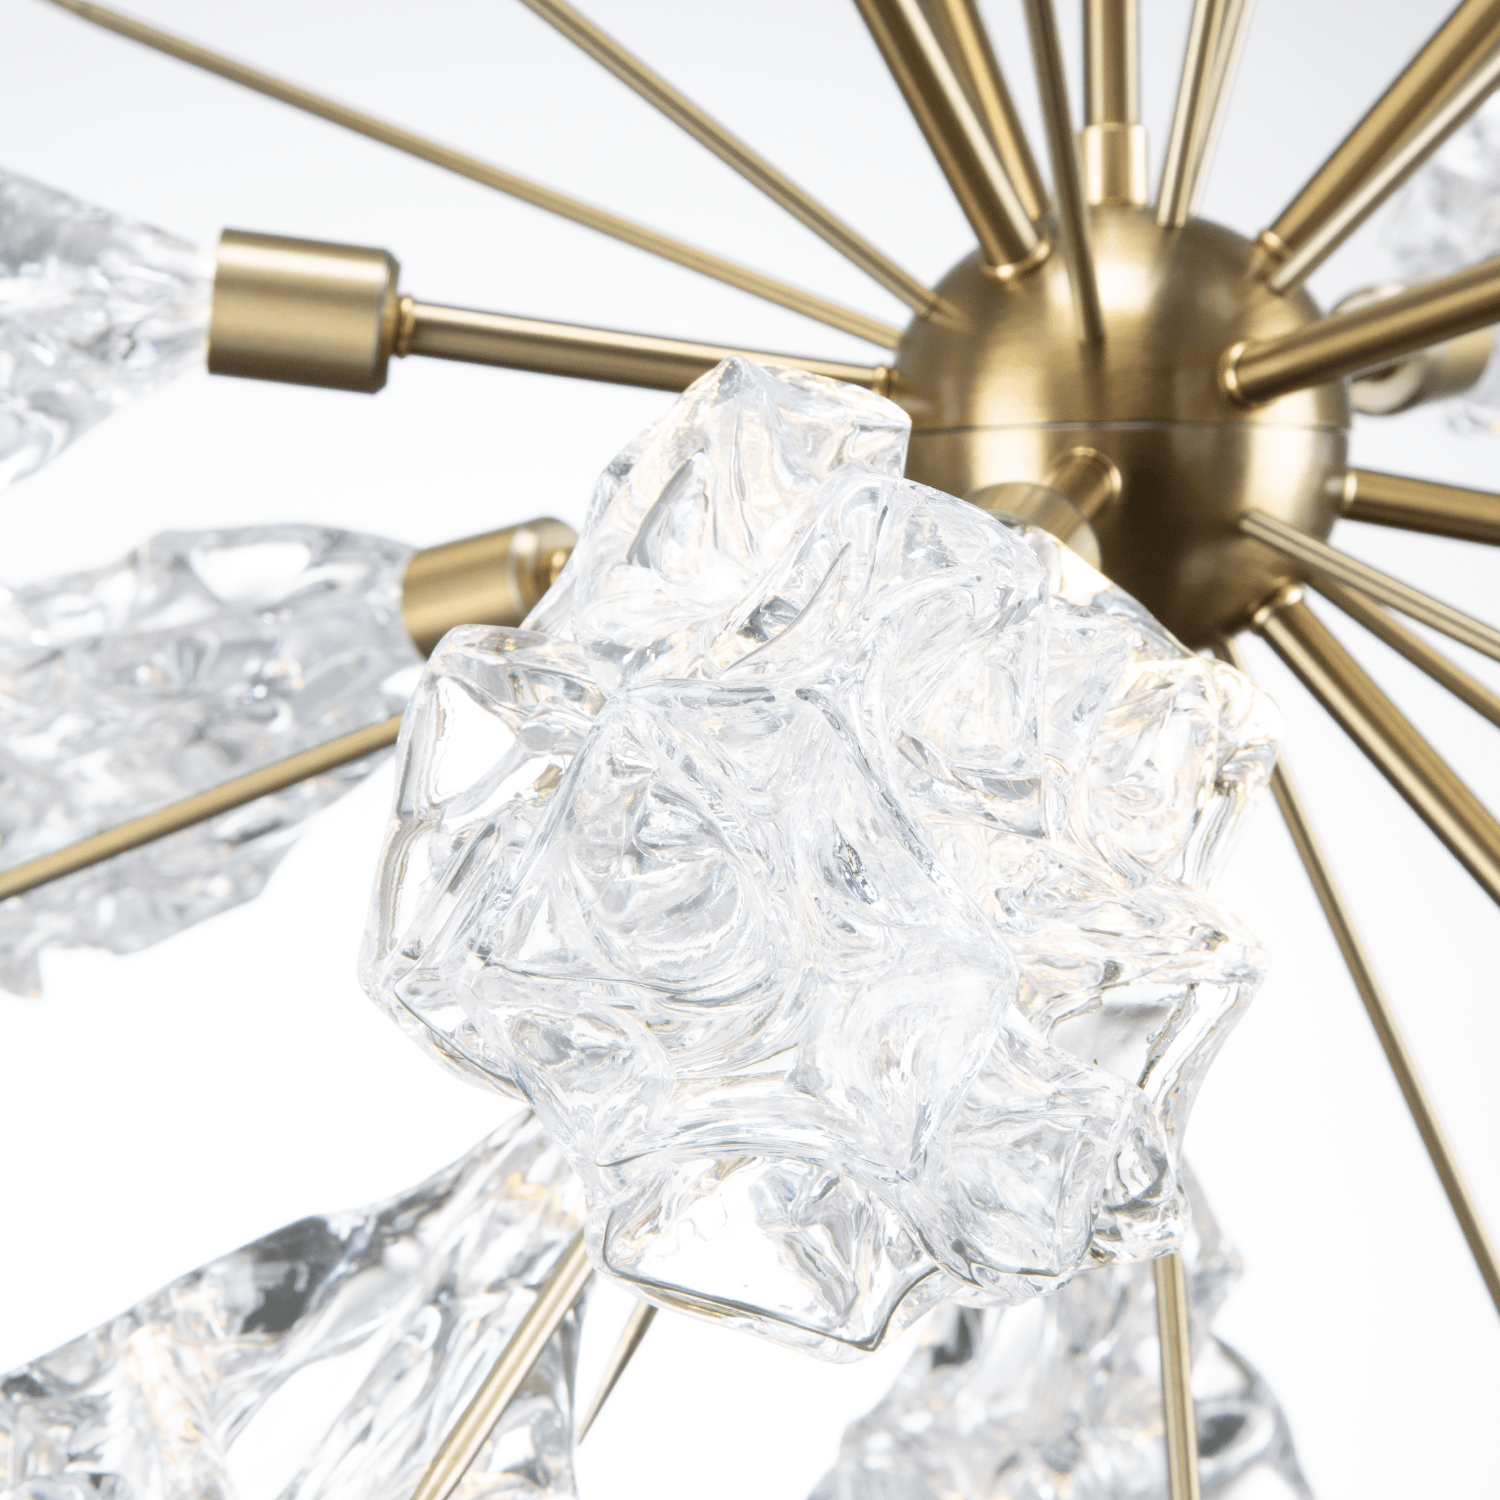 Closup detail of a Hammerton Studio Blossom starburst chandelier with brass finish and blossom-shaped crystal glass light shades.